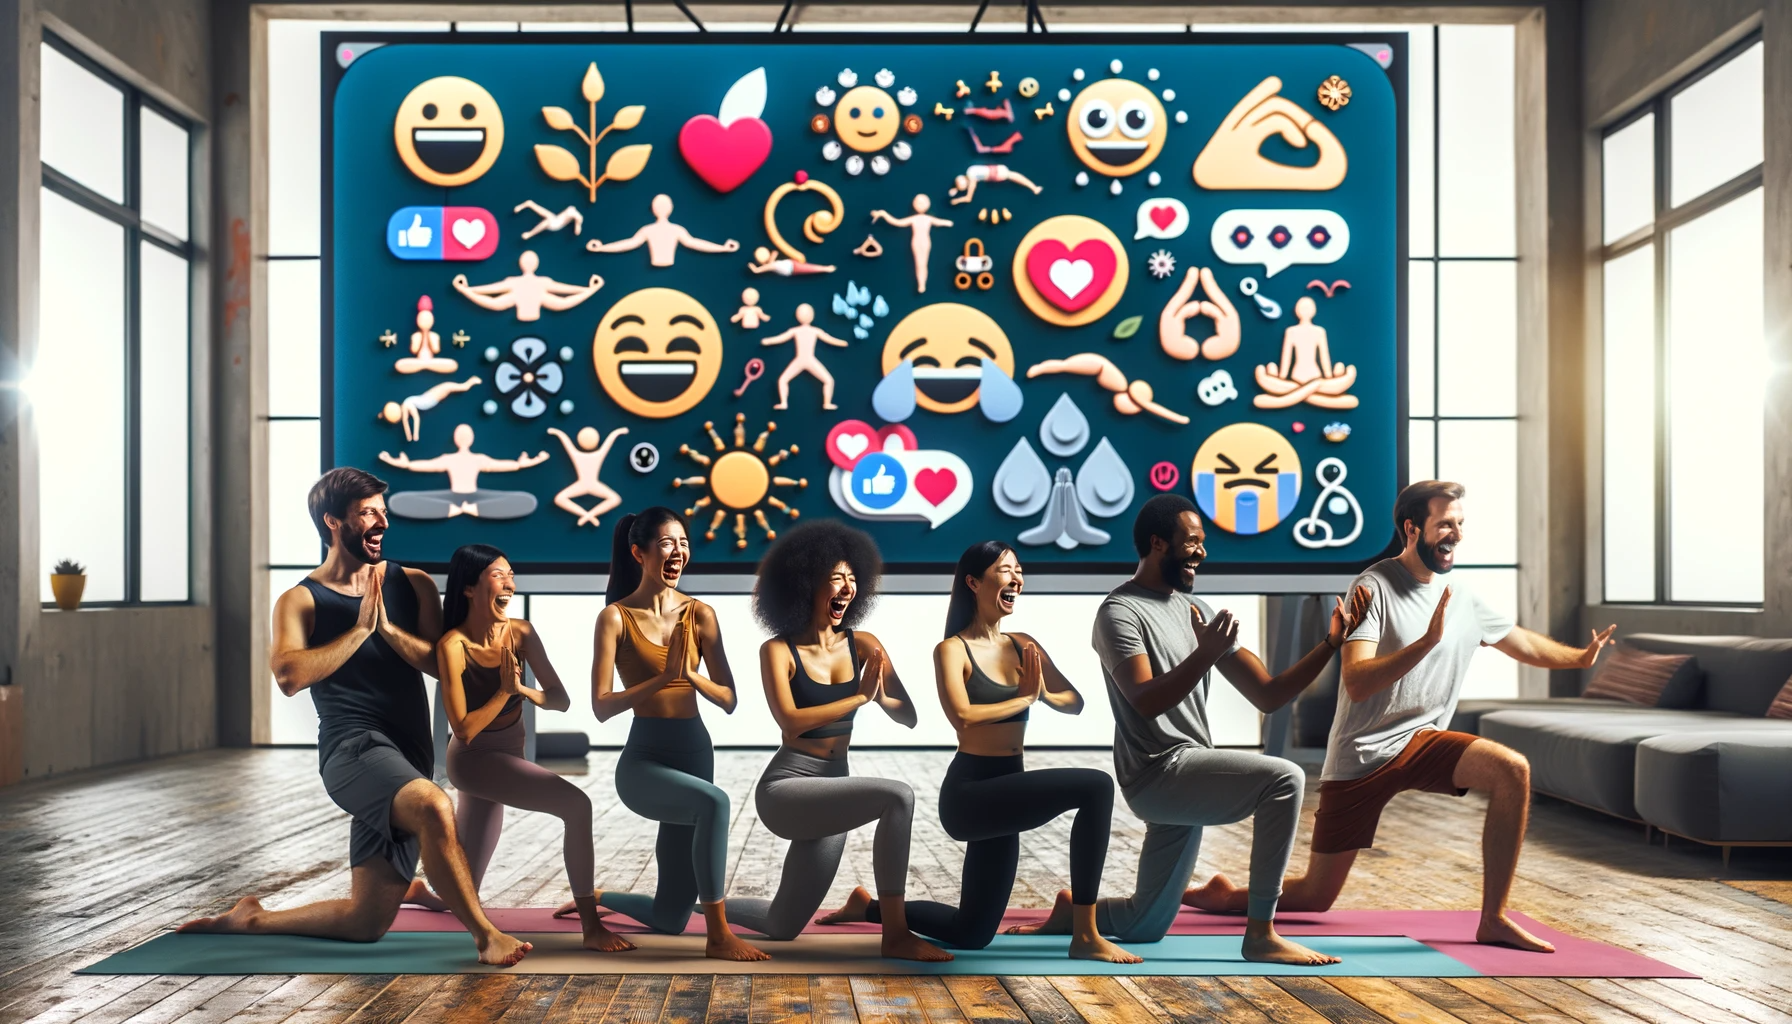 diverse individuals in various yoga poses, laughing and sharing a digital screen displaying abstract, humorous, and relatable yoga-related symbols and emojis